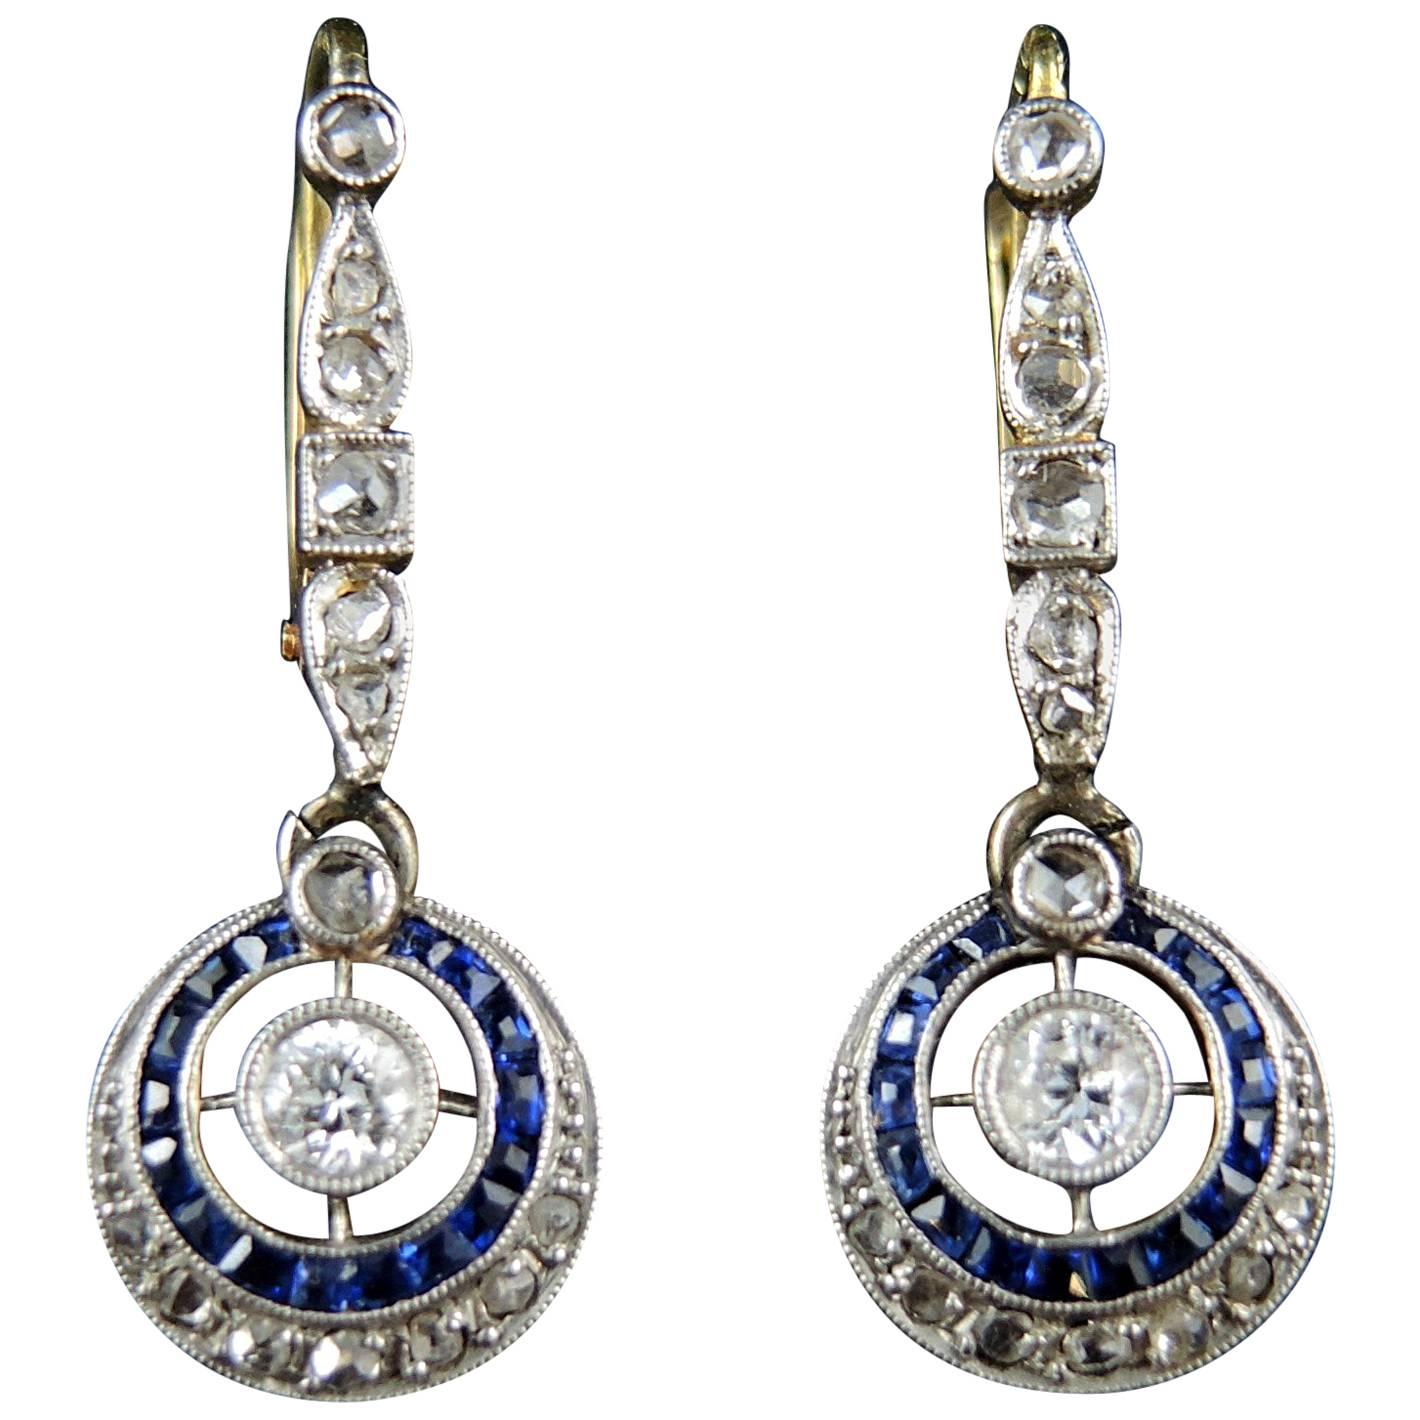 Art Deco Antique French Earrings with Diamonds and Sapphires, circa 1920